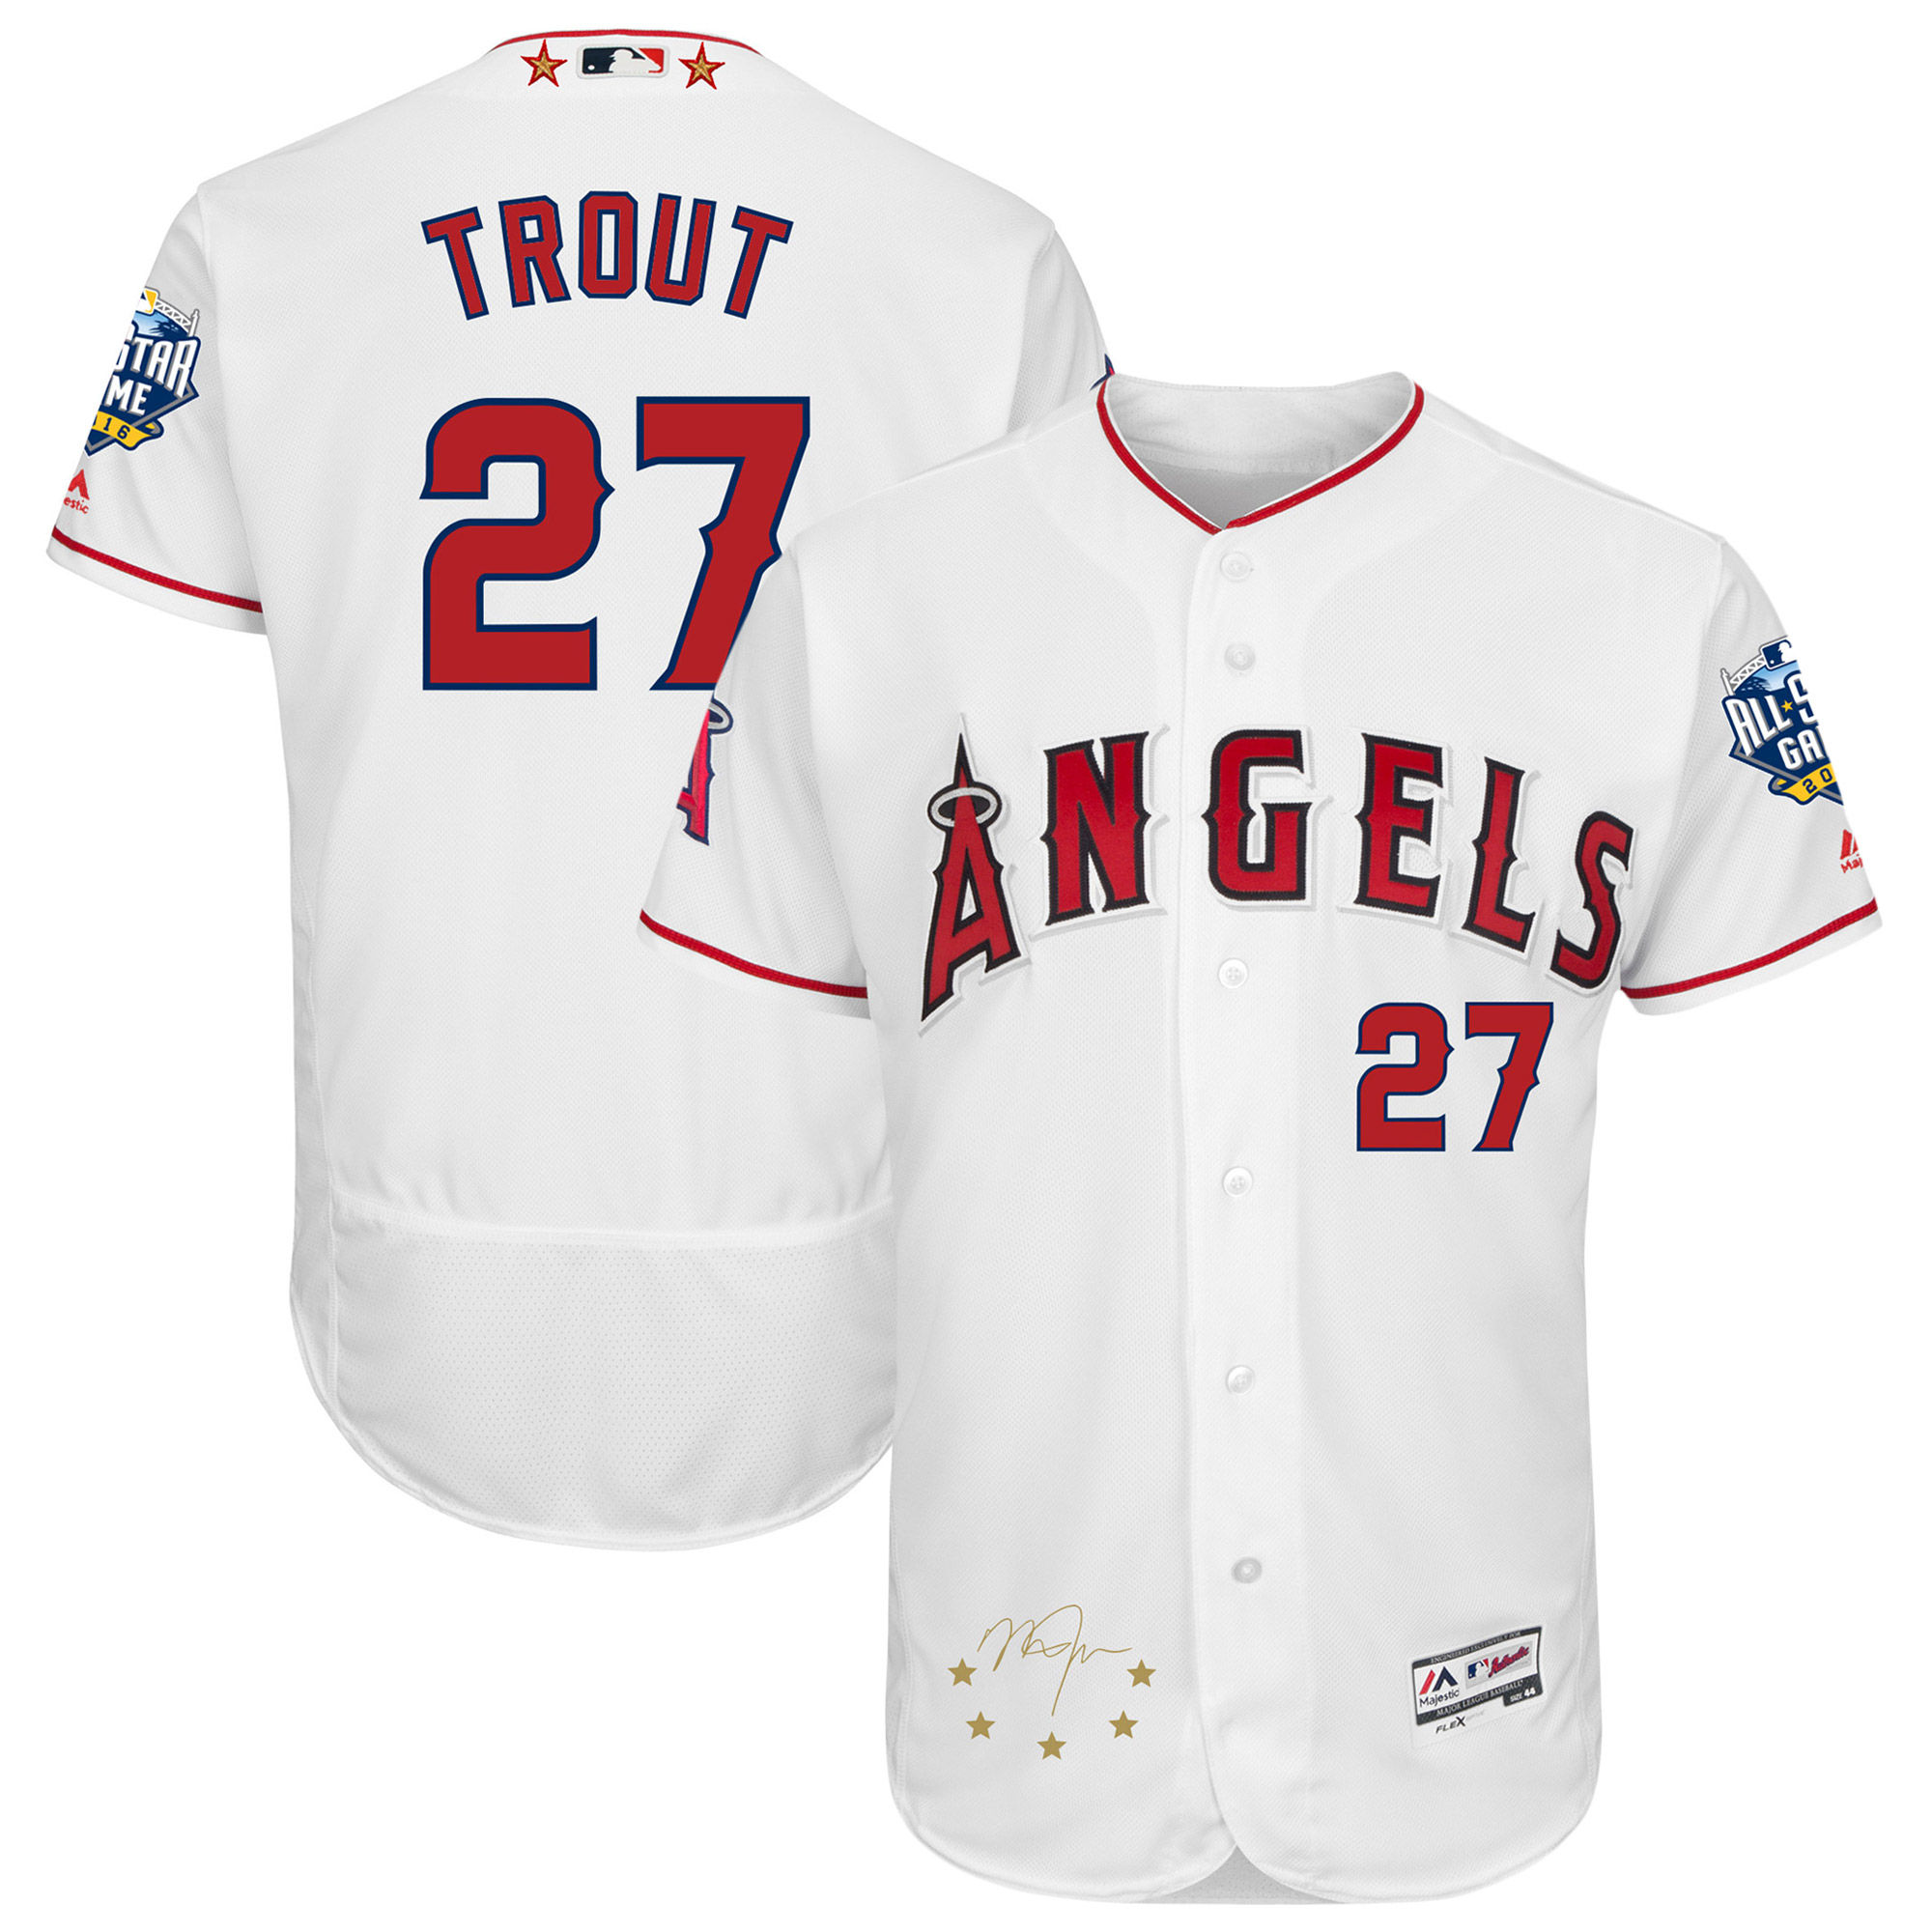 Angels 27 Mike Trout White 2016 All-Star Game Signature Flexbase Jersey